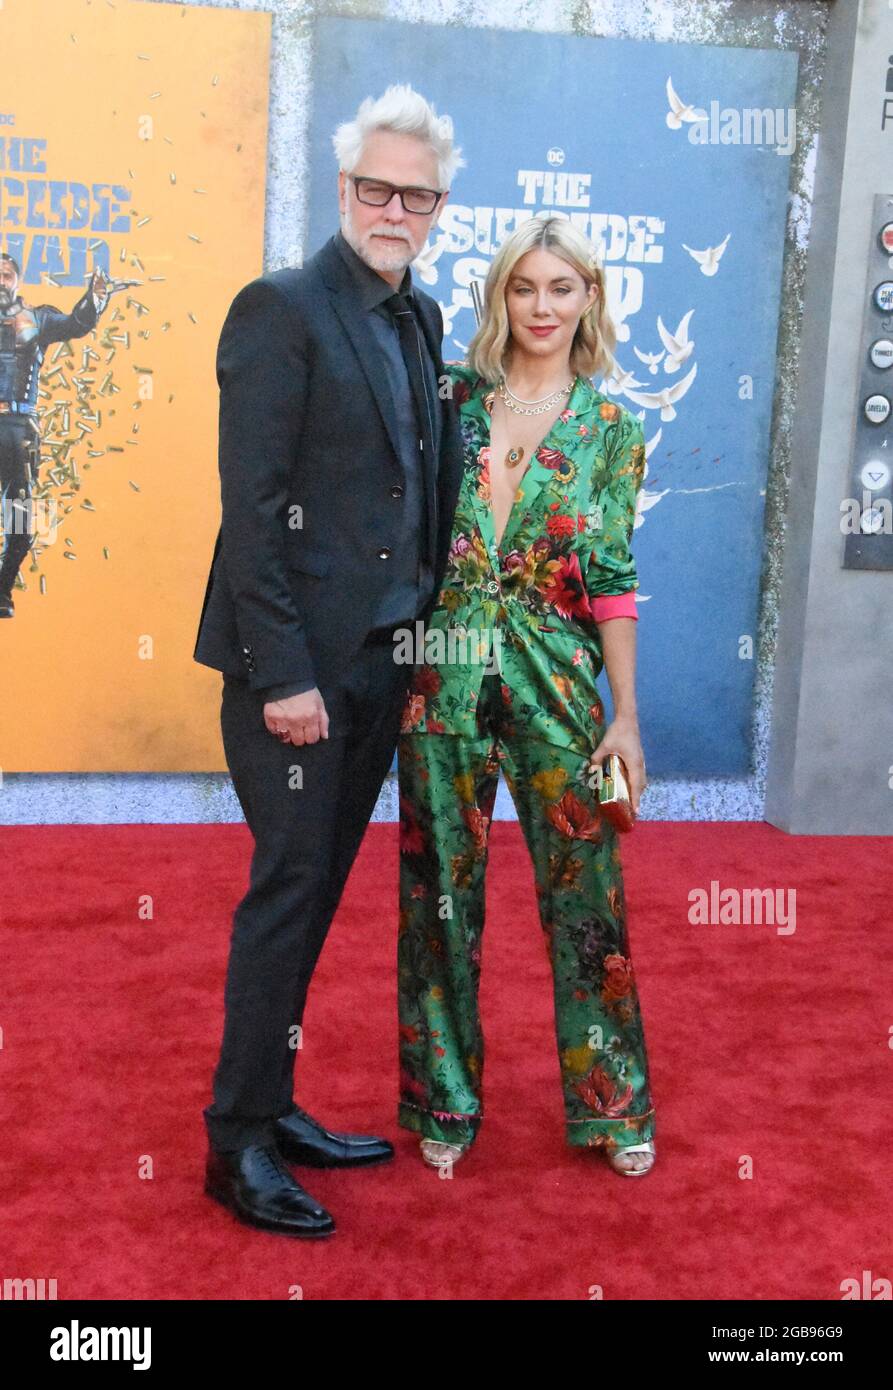 Los Angeles, California, USA 2nd August 2021 Director James Gunn and Jennifer Holland attend Warner Bros. Premiere of 'The Suicide Squad' at Regency Village Theatre on August 2, 2021 in Los Angeles, California, USA. Photo by Barry King/Alamy Live News Stock Photo